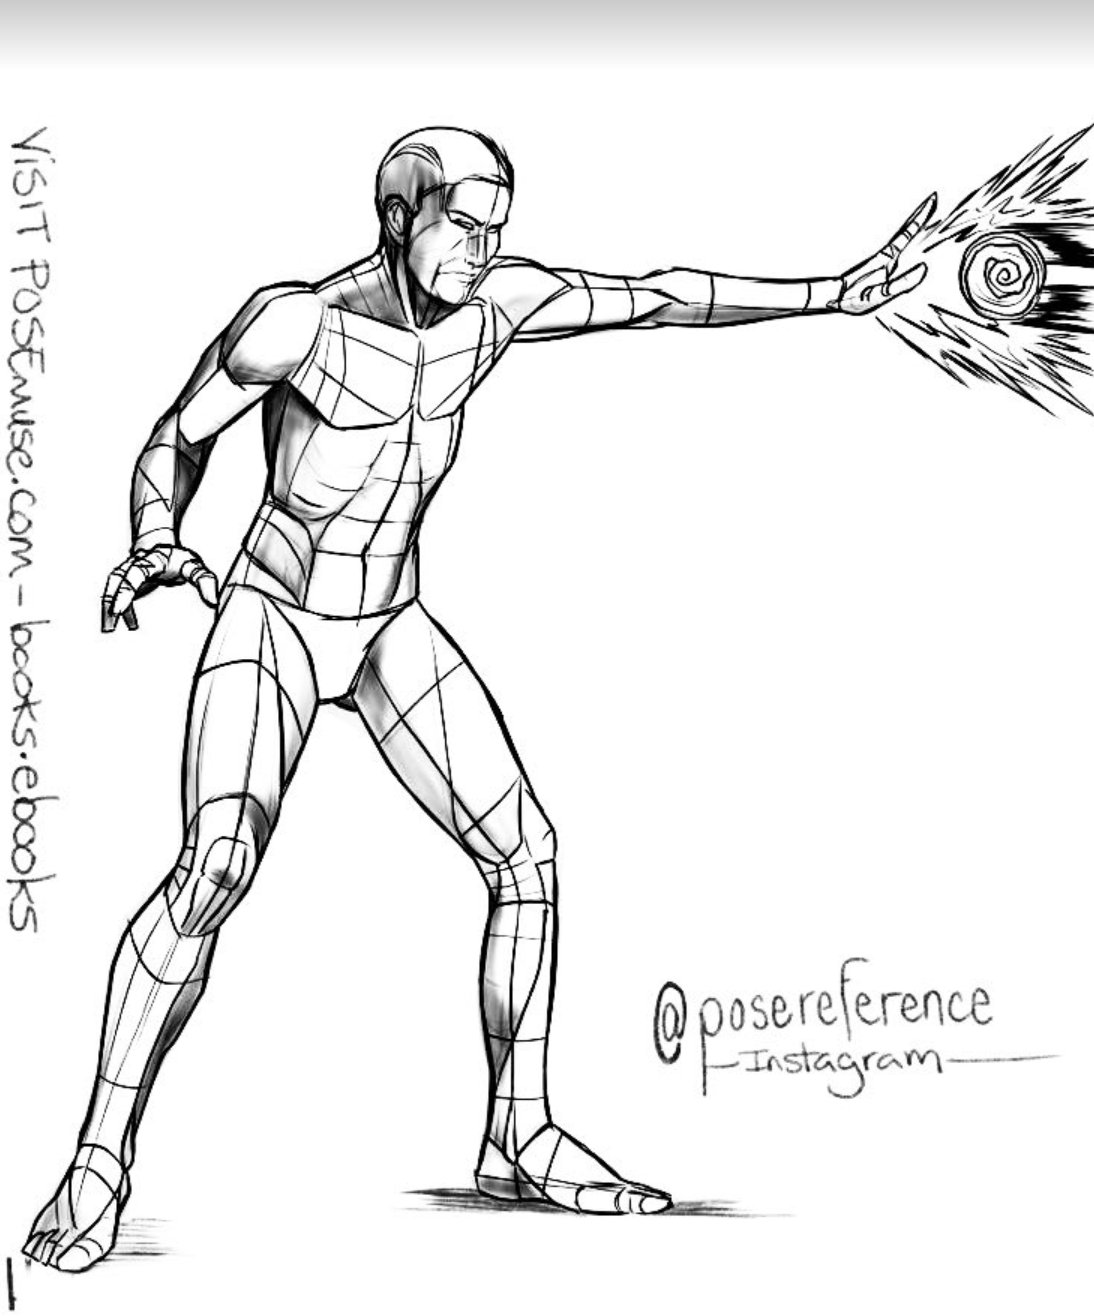 Pose reference, Body reference drawing, Drawing poses